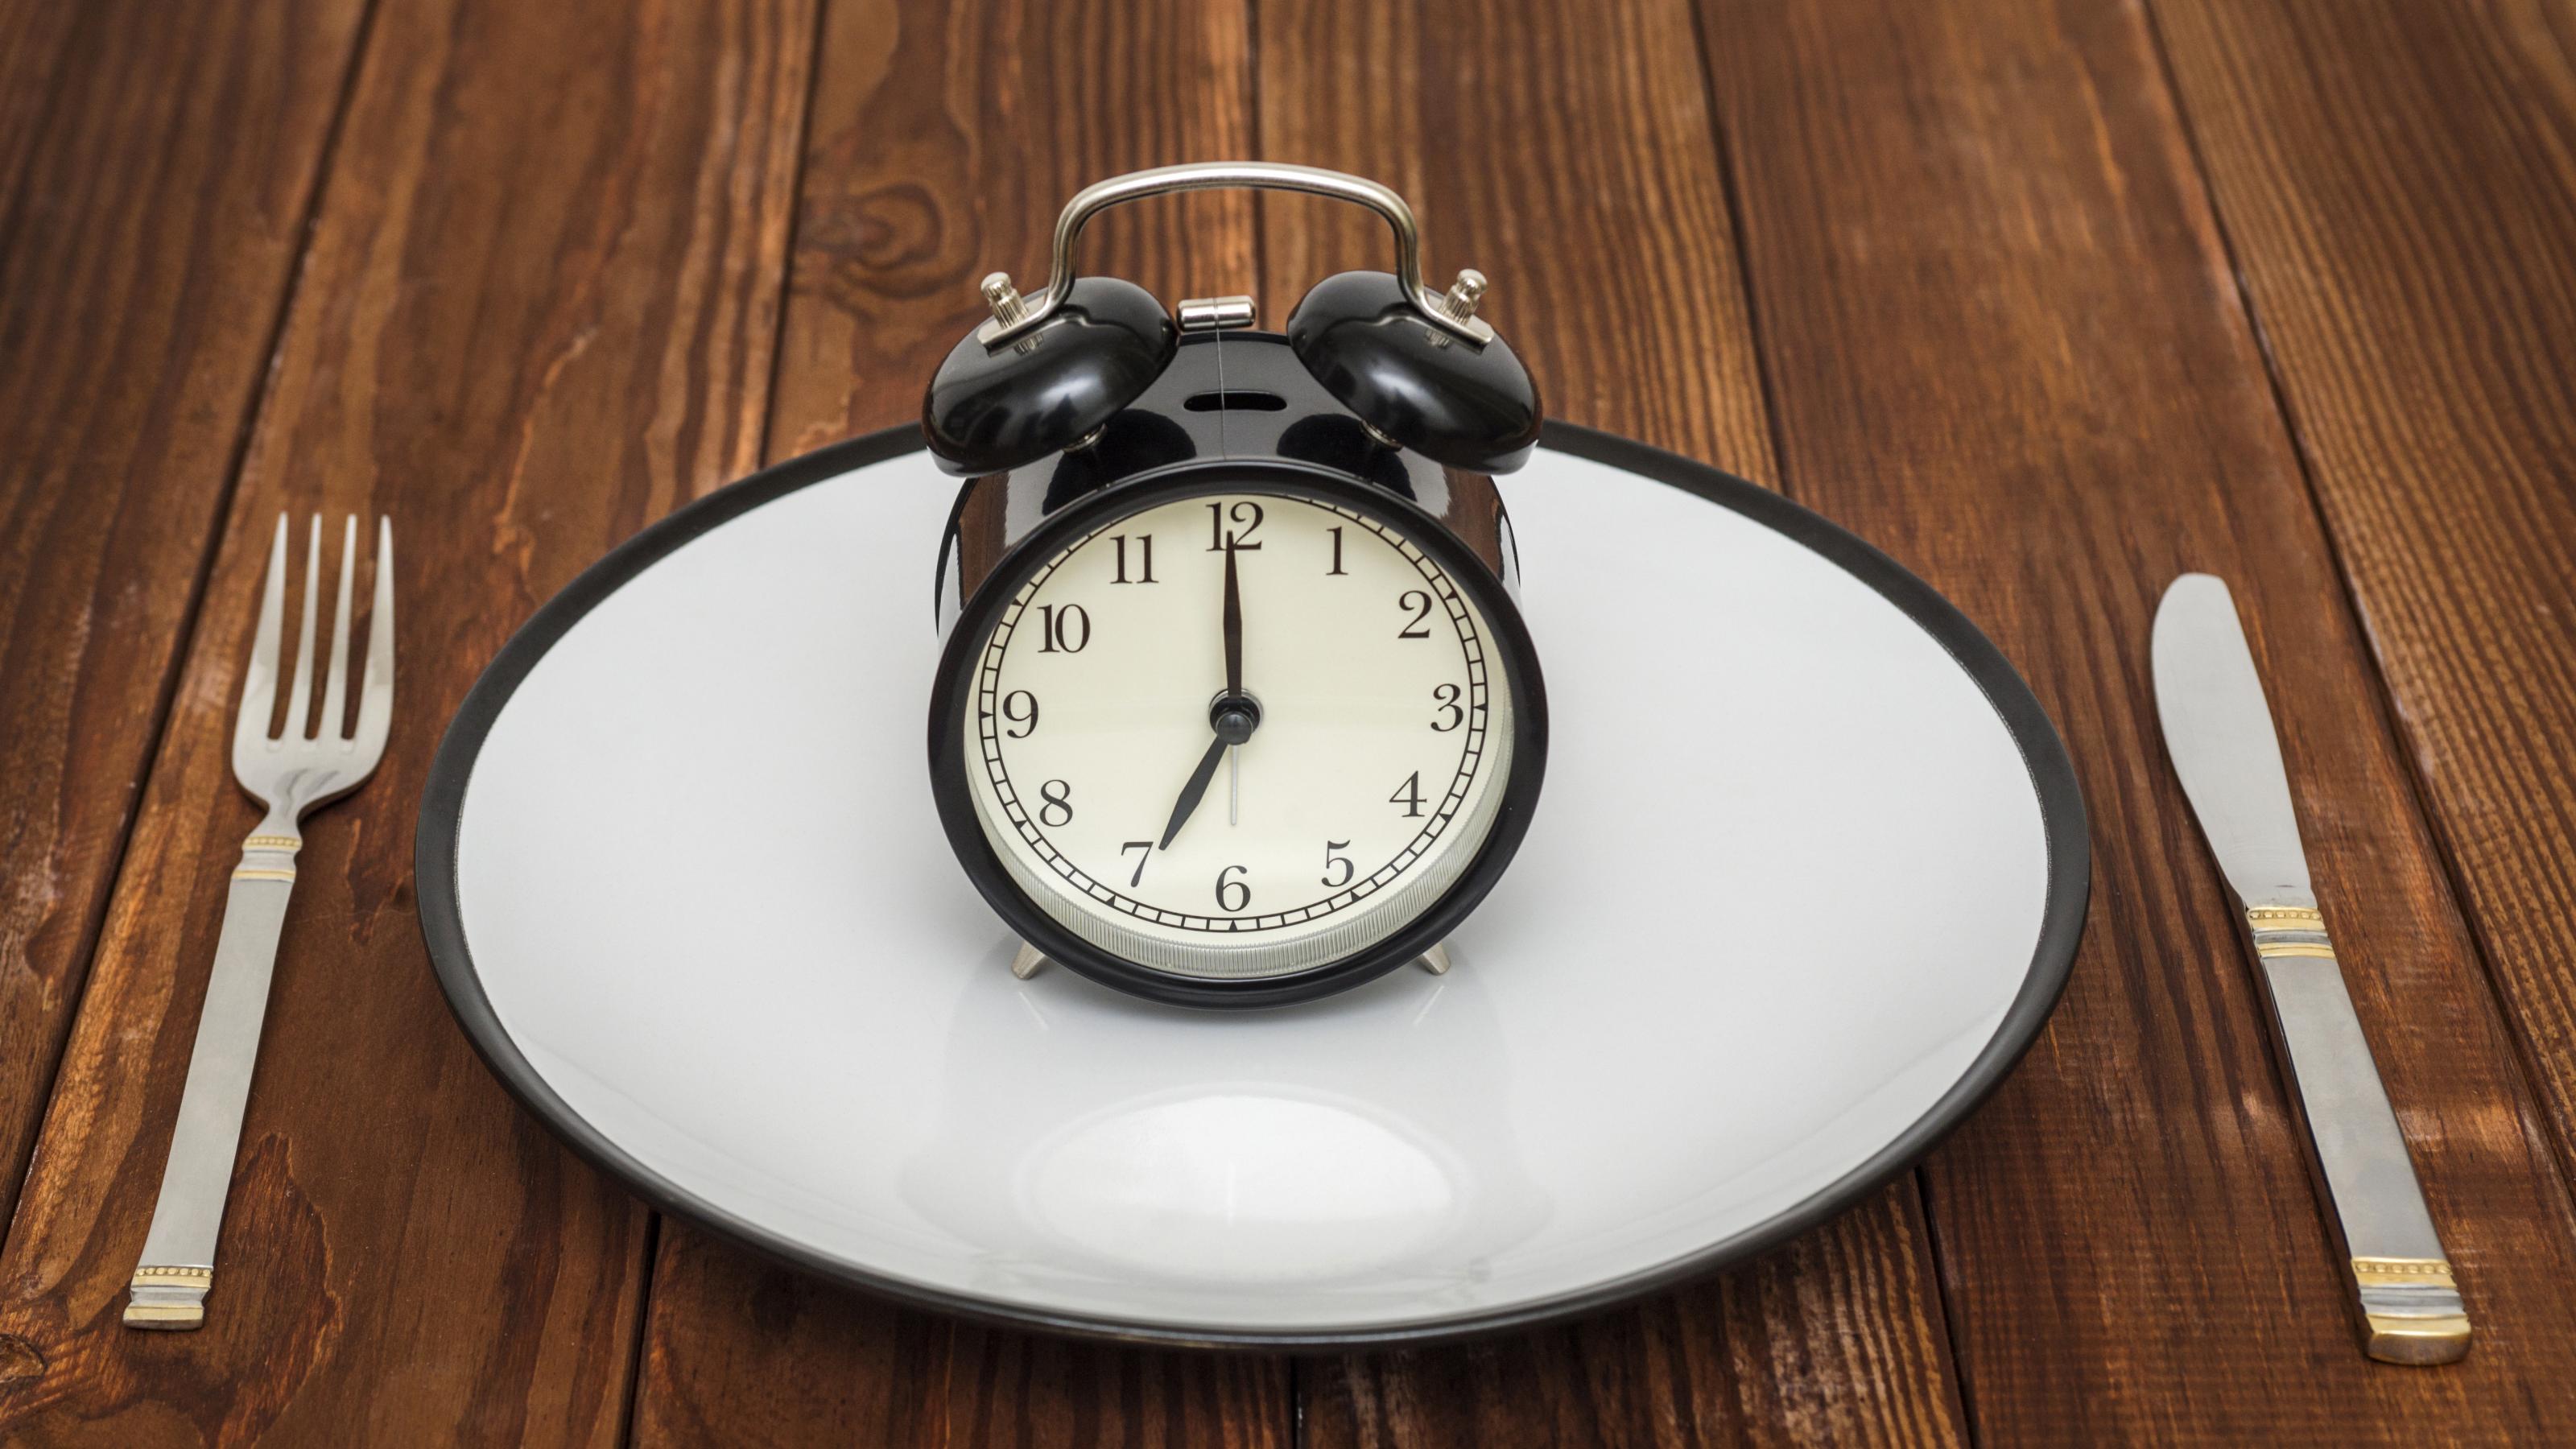 Alarm clock on plate with knife and fork on wooden background. Weight loss or diet concept